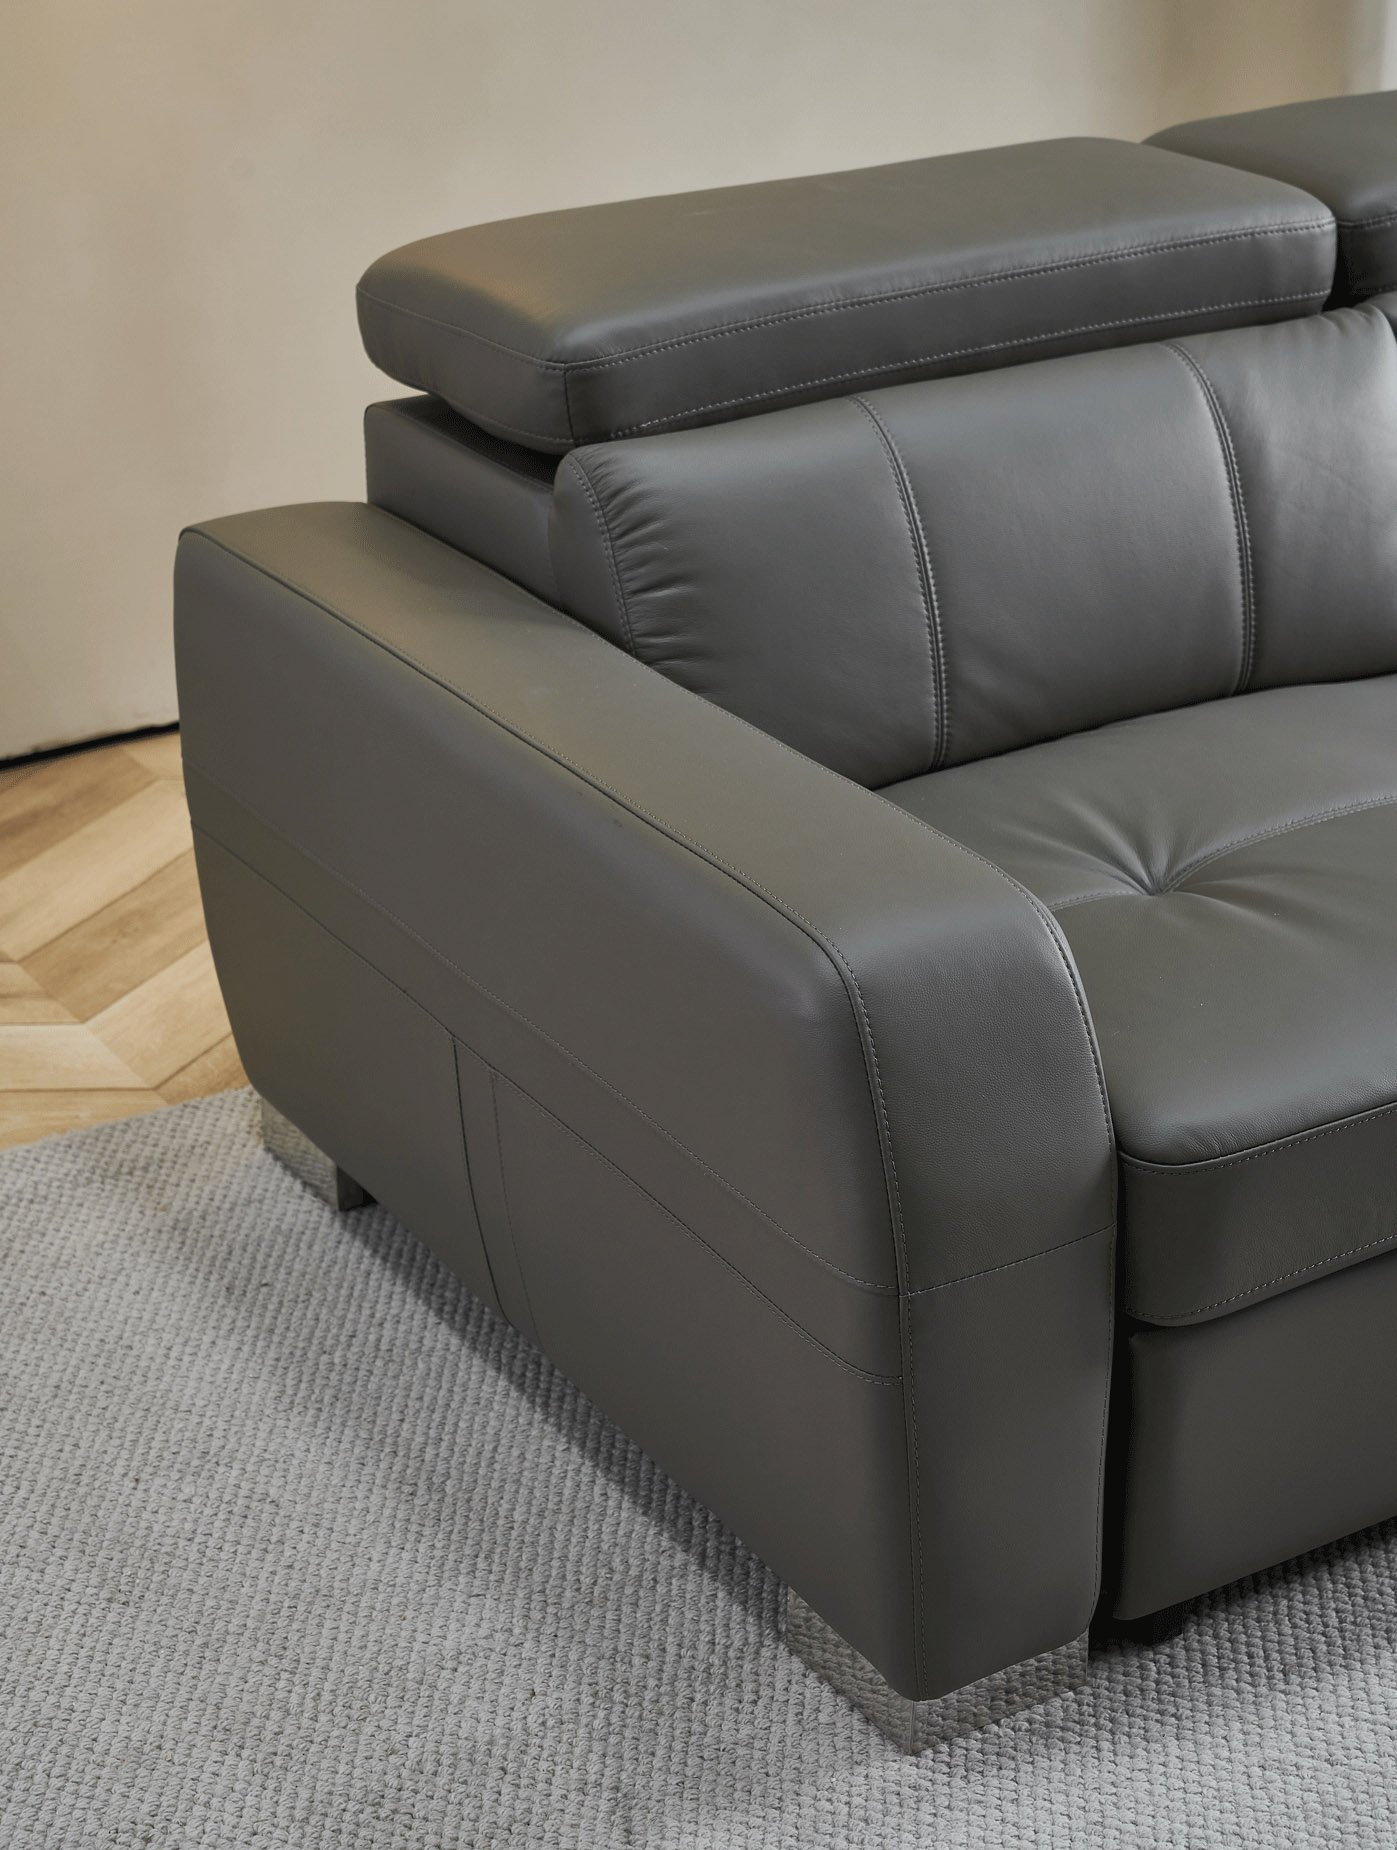 Contemporary Dark Grey Leather Sofabed Sectional